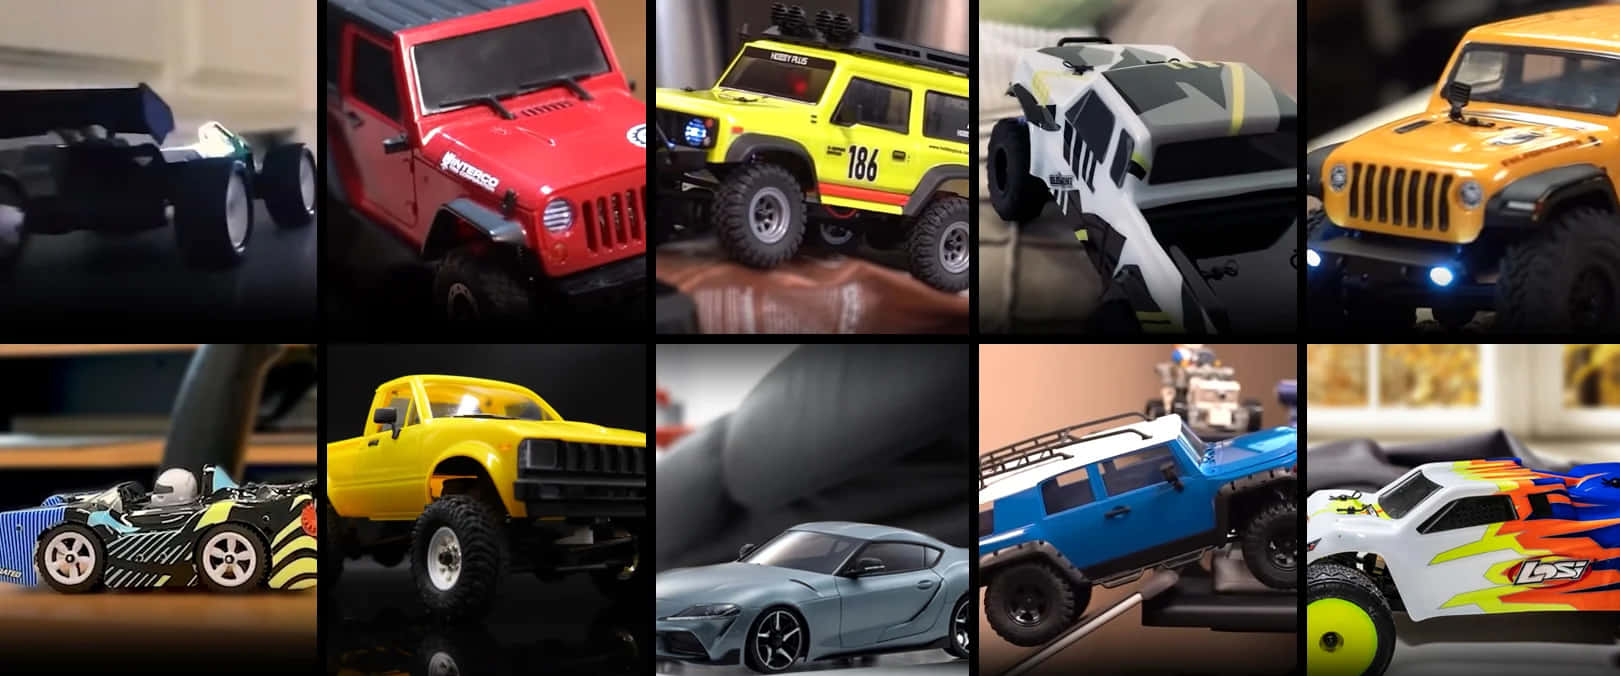 A Collage Of Different Toy Trucks And Cars